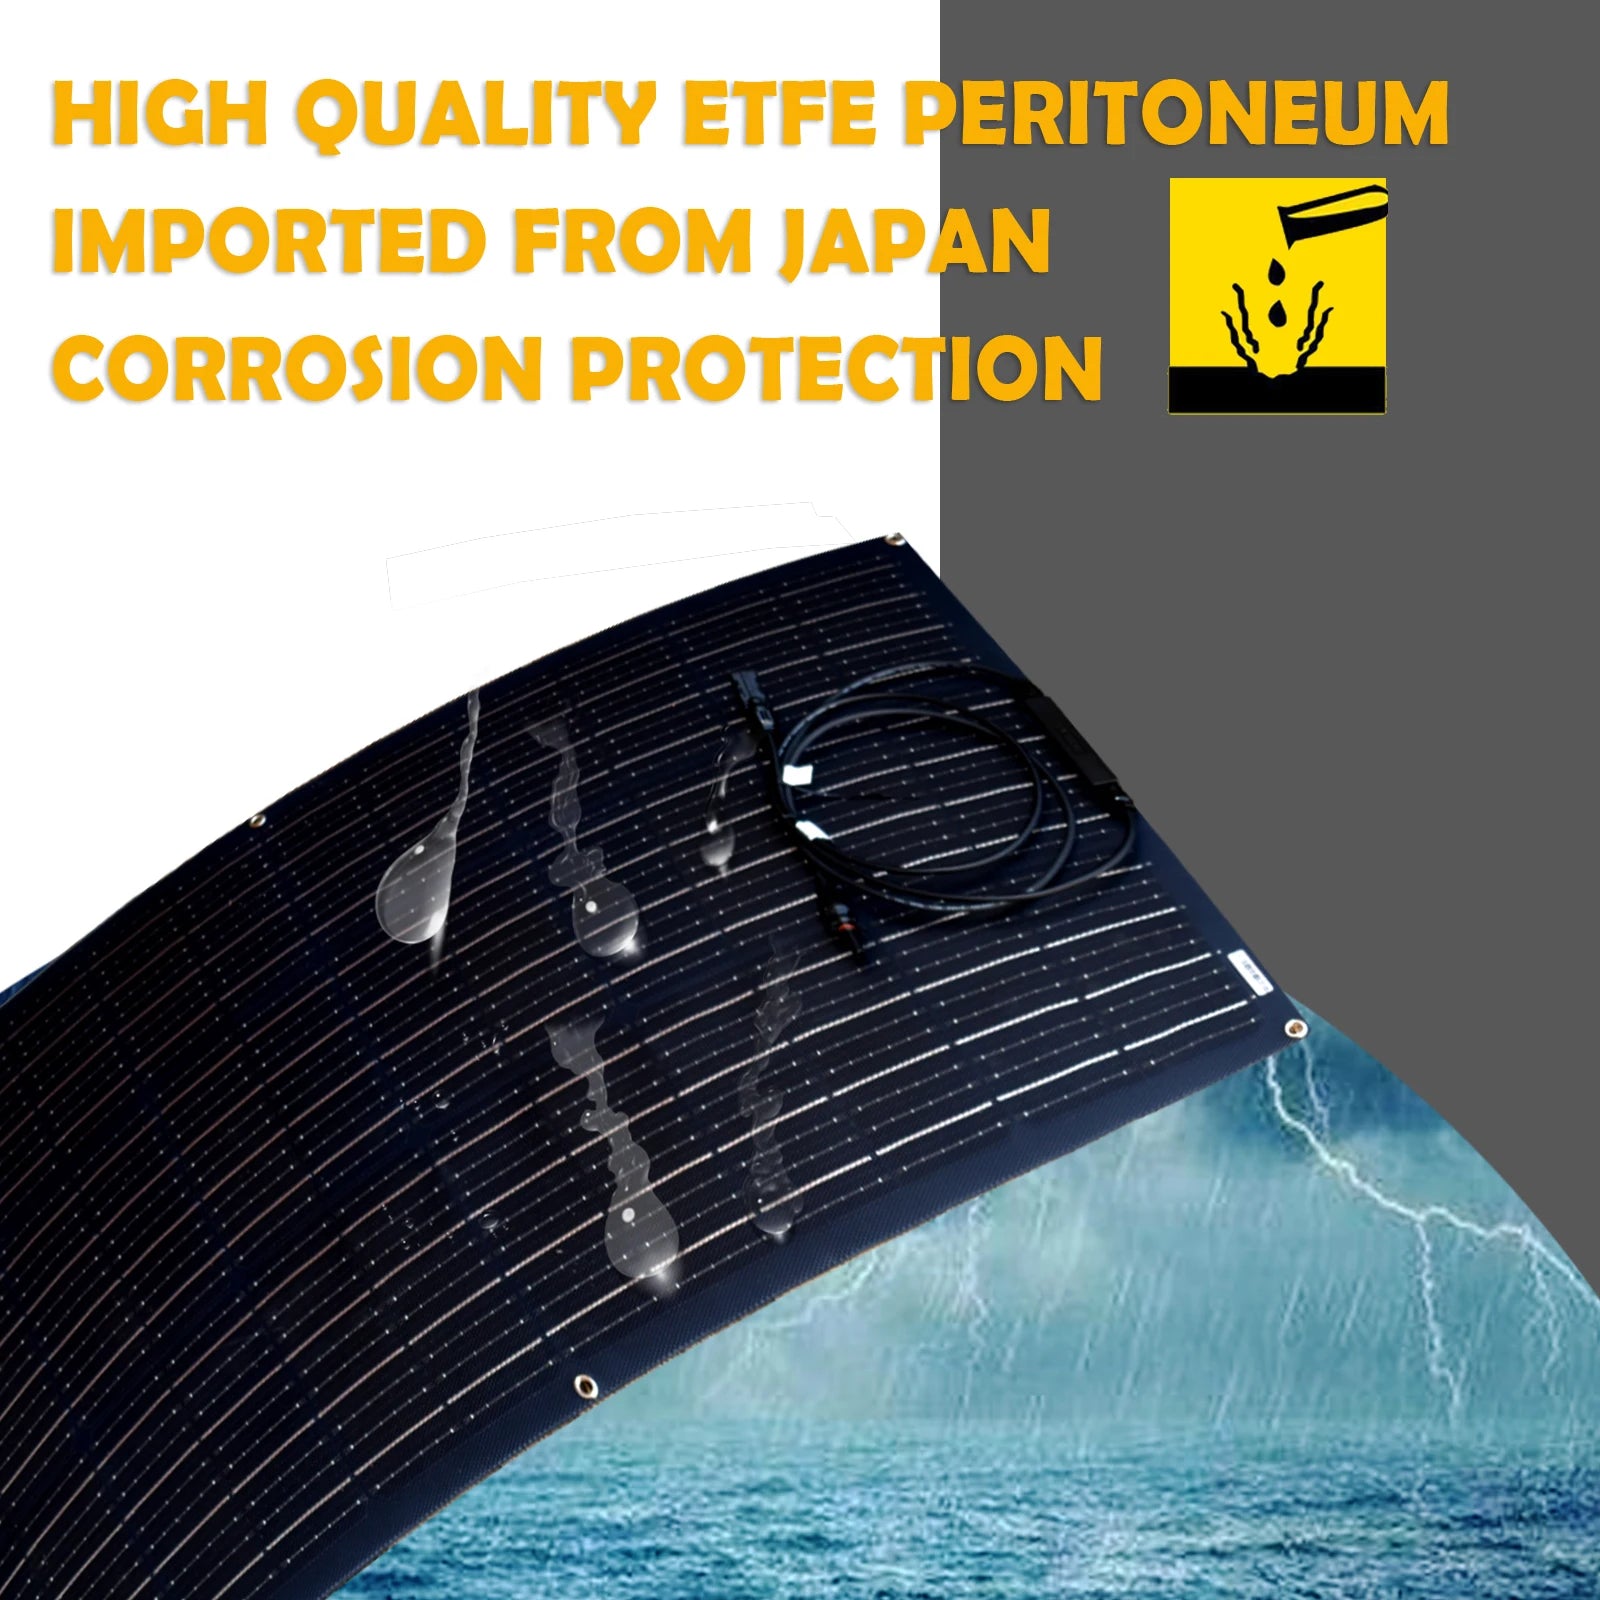 JINGYANG long lasting Semi Flexible solar panel, Japanese-imported high-quality ETFE material offers corrosion protection for solar panels, ensuring durability and reliability.